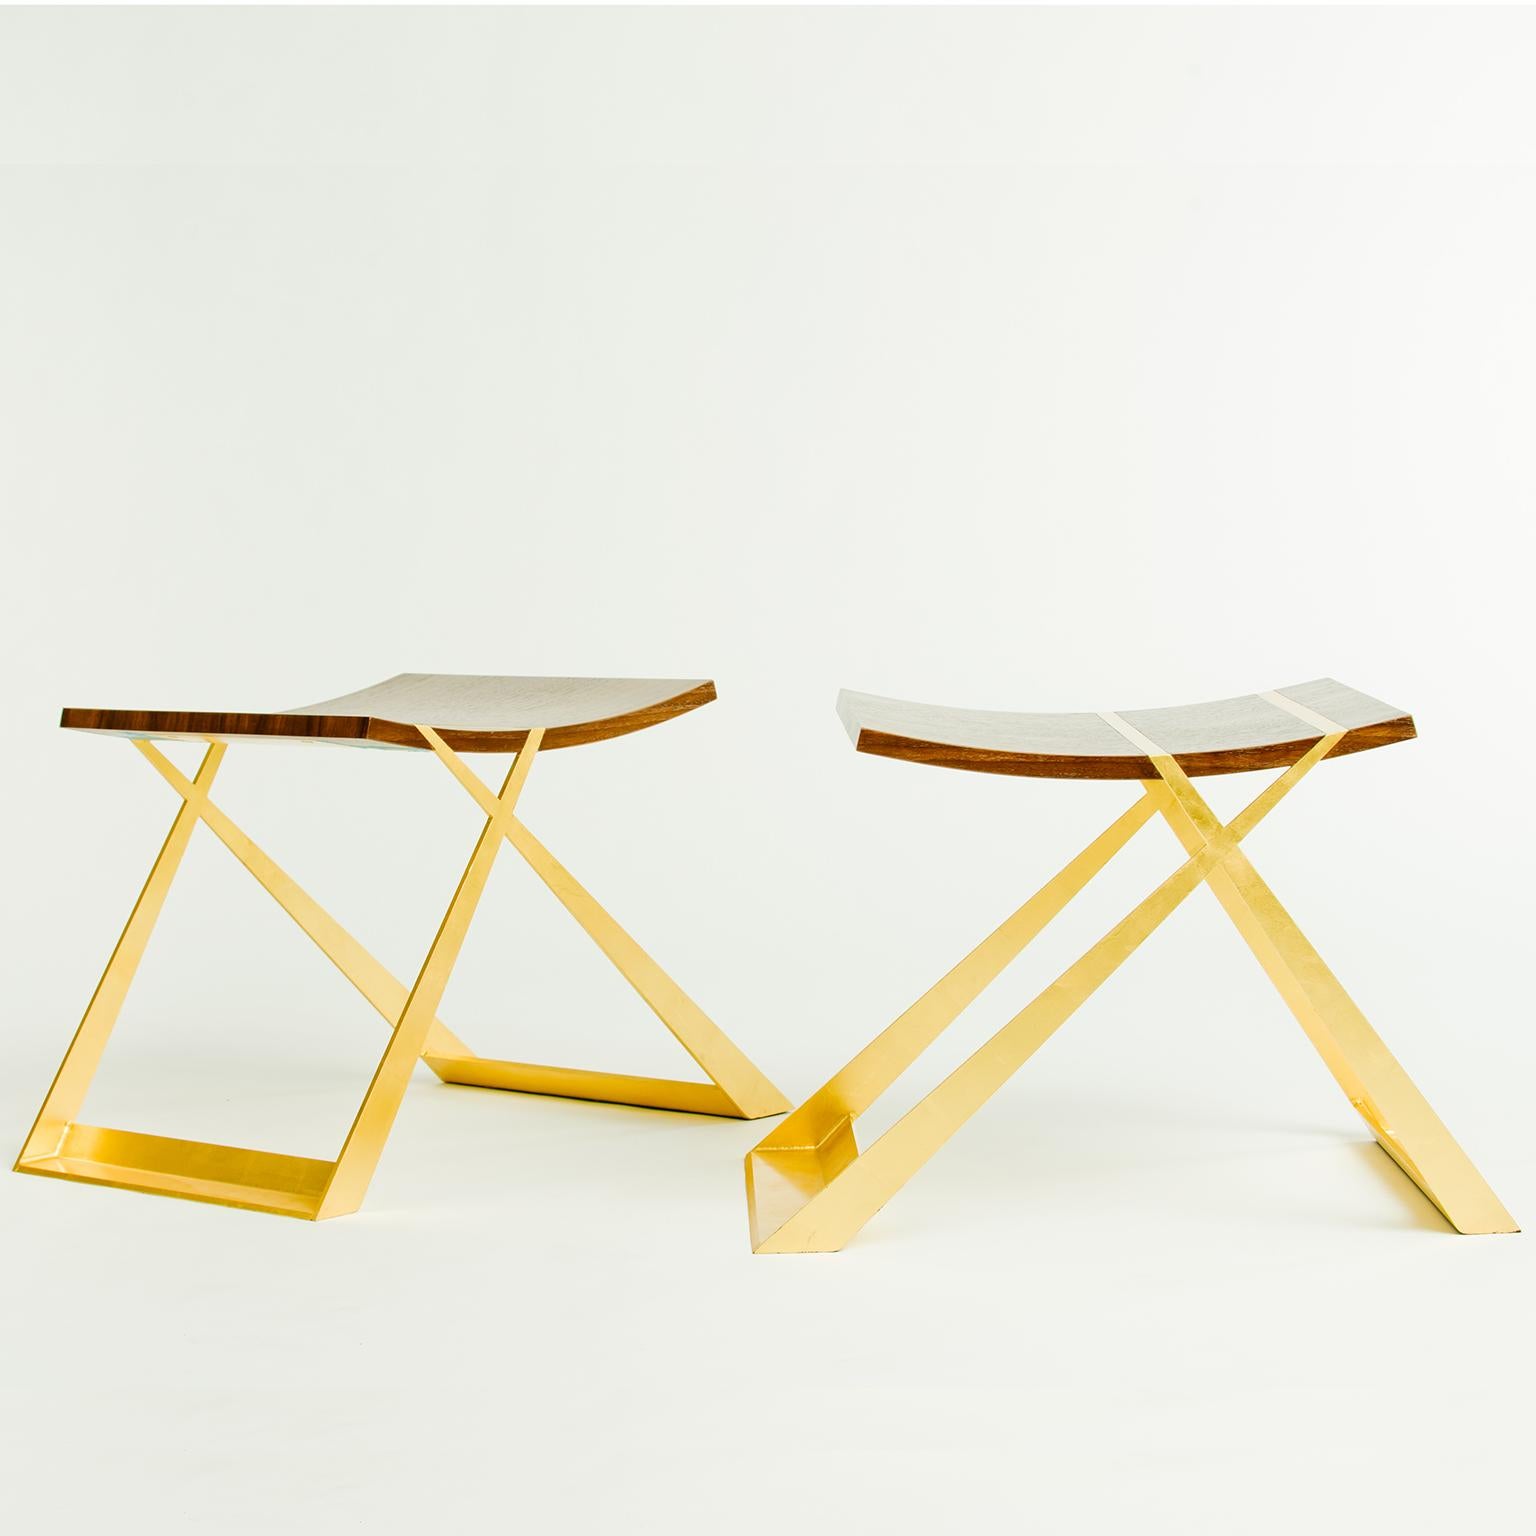 American Wooster Stool, in Walnut and Gold Leaf, by Dean and Dahl